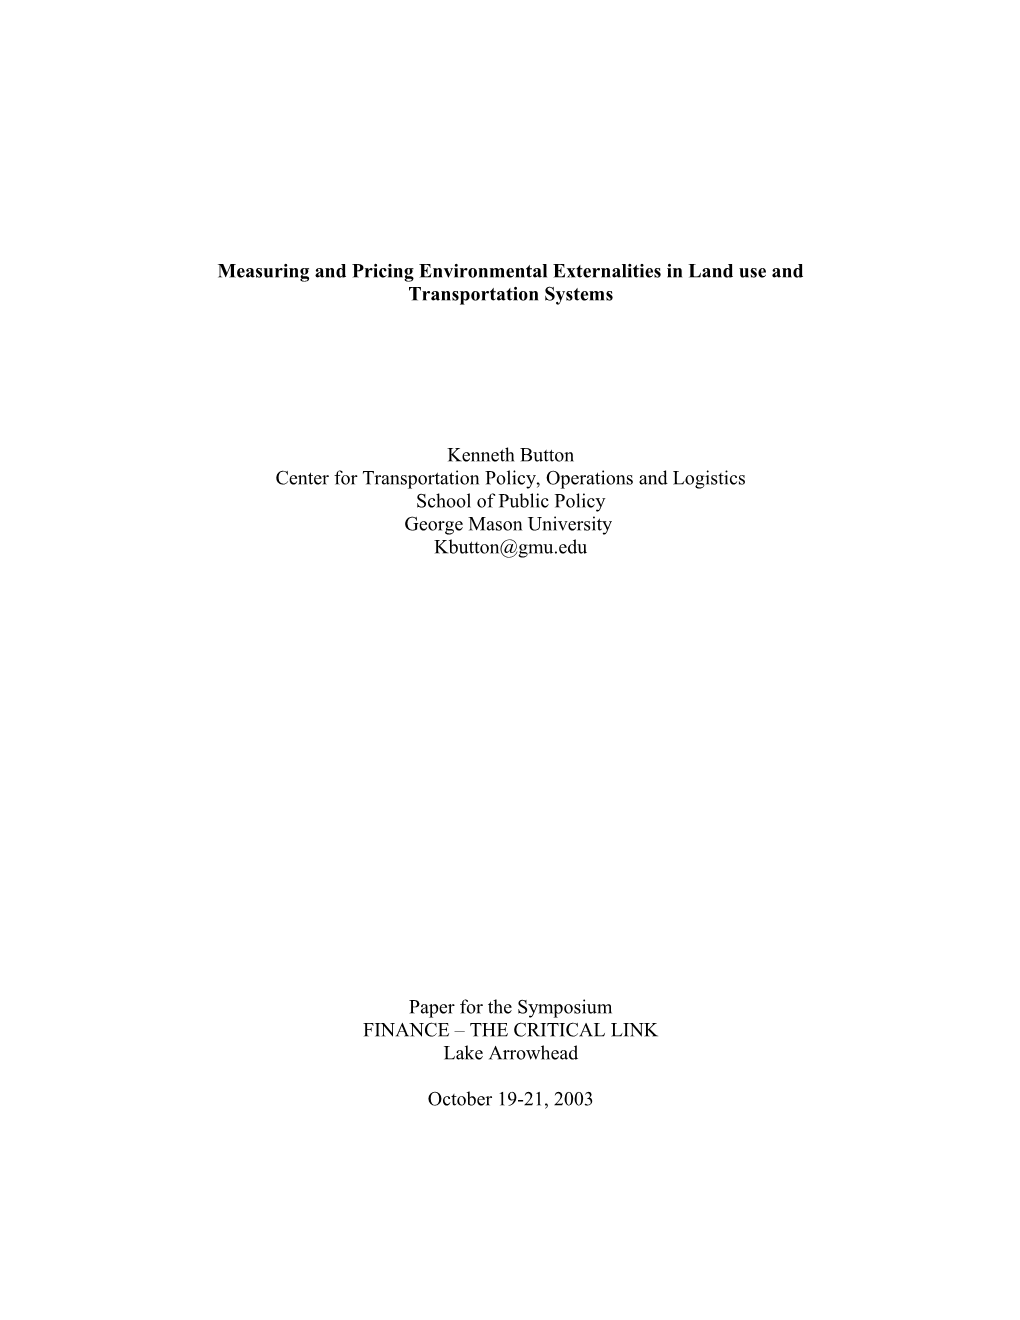 Measuring and Pricing Environmental Externalities in Land Use and Transportation Systems